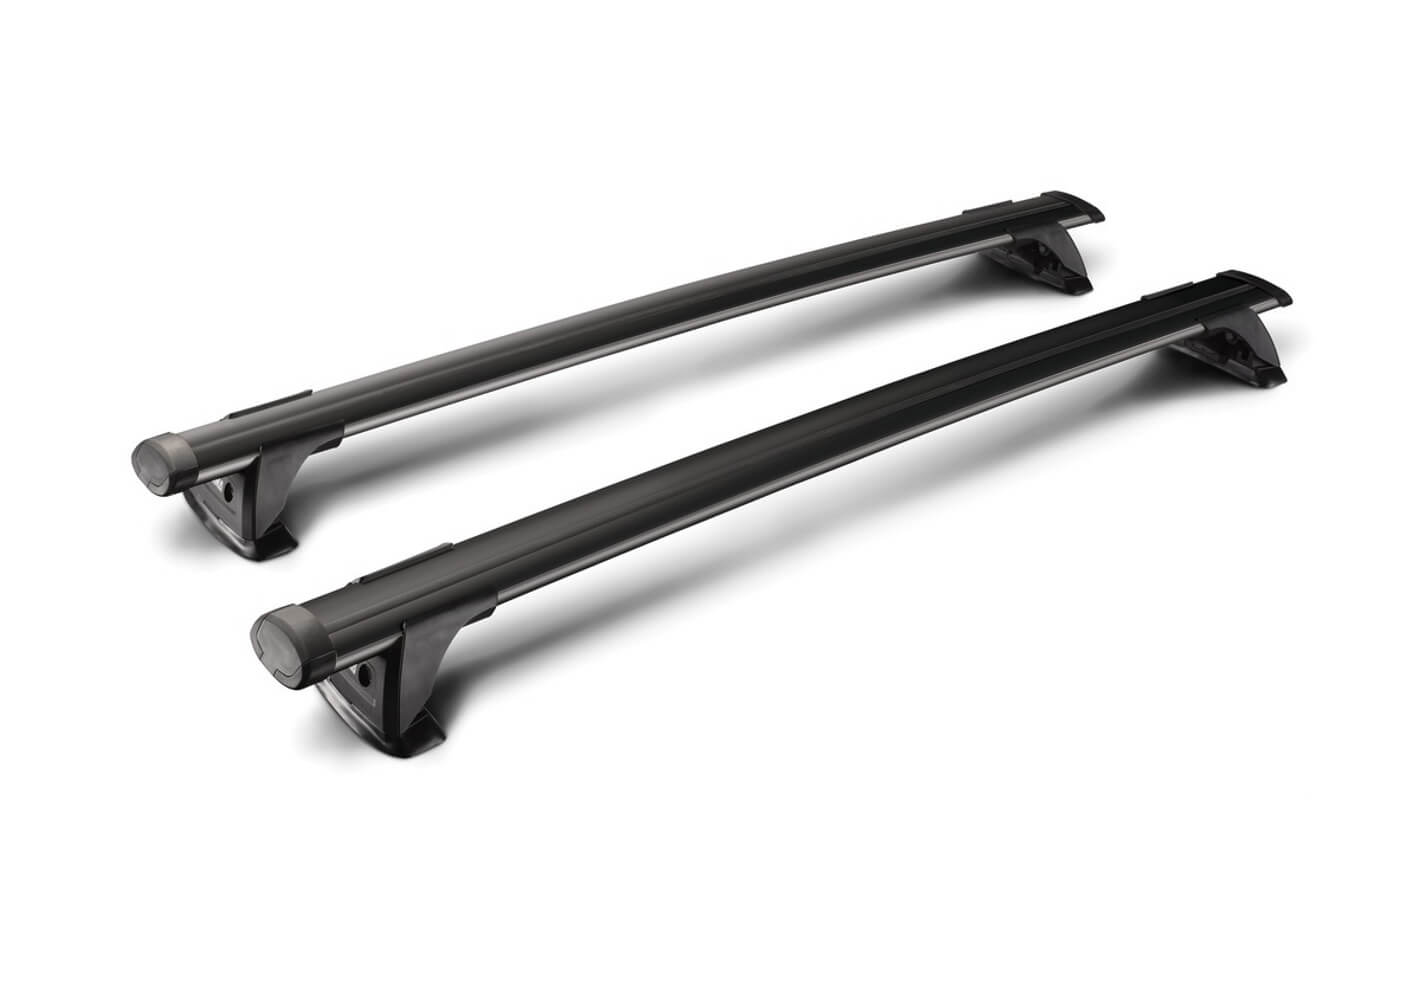 Ssangyong Rexton (2001 to 2013):Yakima roof bars package - S16B black bars with K328 kit